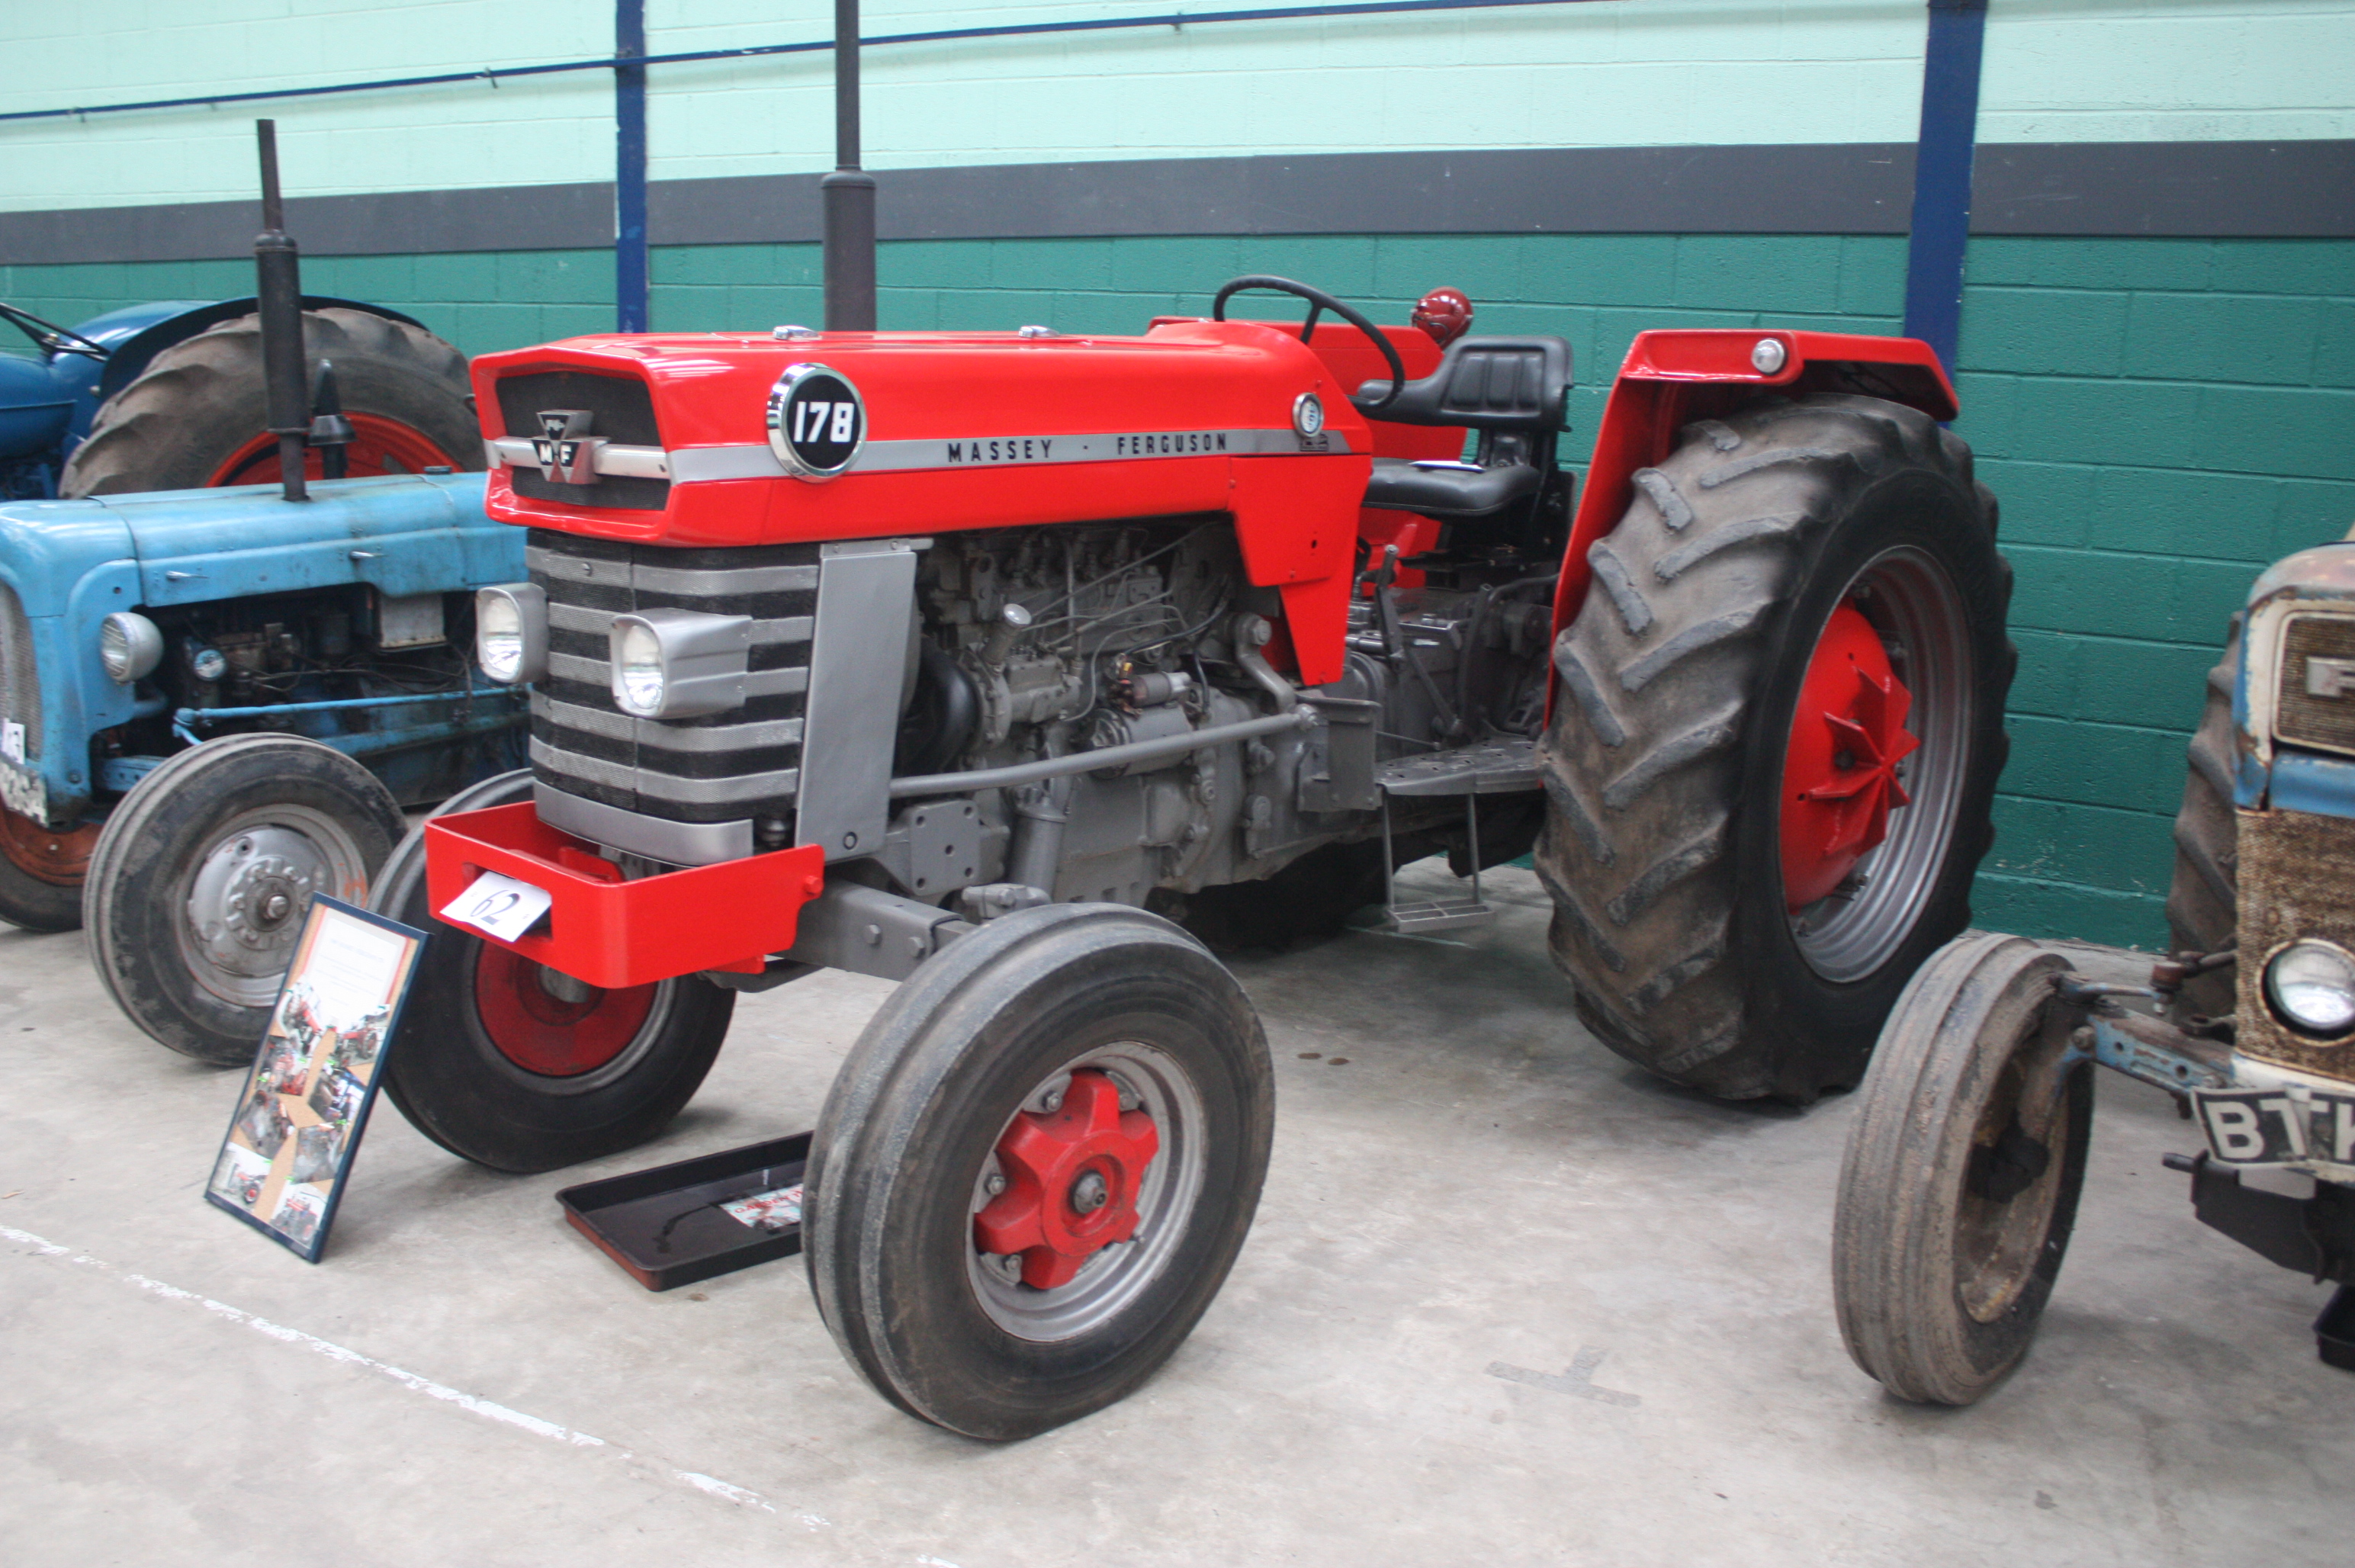 Massey Ferguson Tractor And Construction Plant Wiki The Classic Vehicle And Machinery Wiki 6770